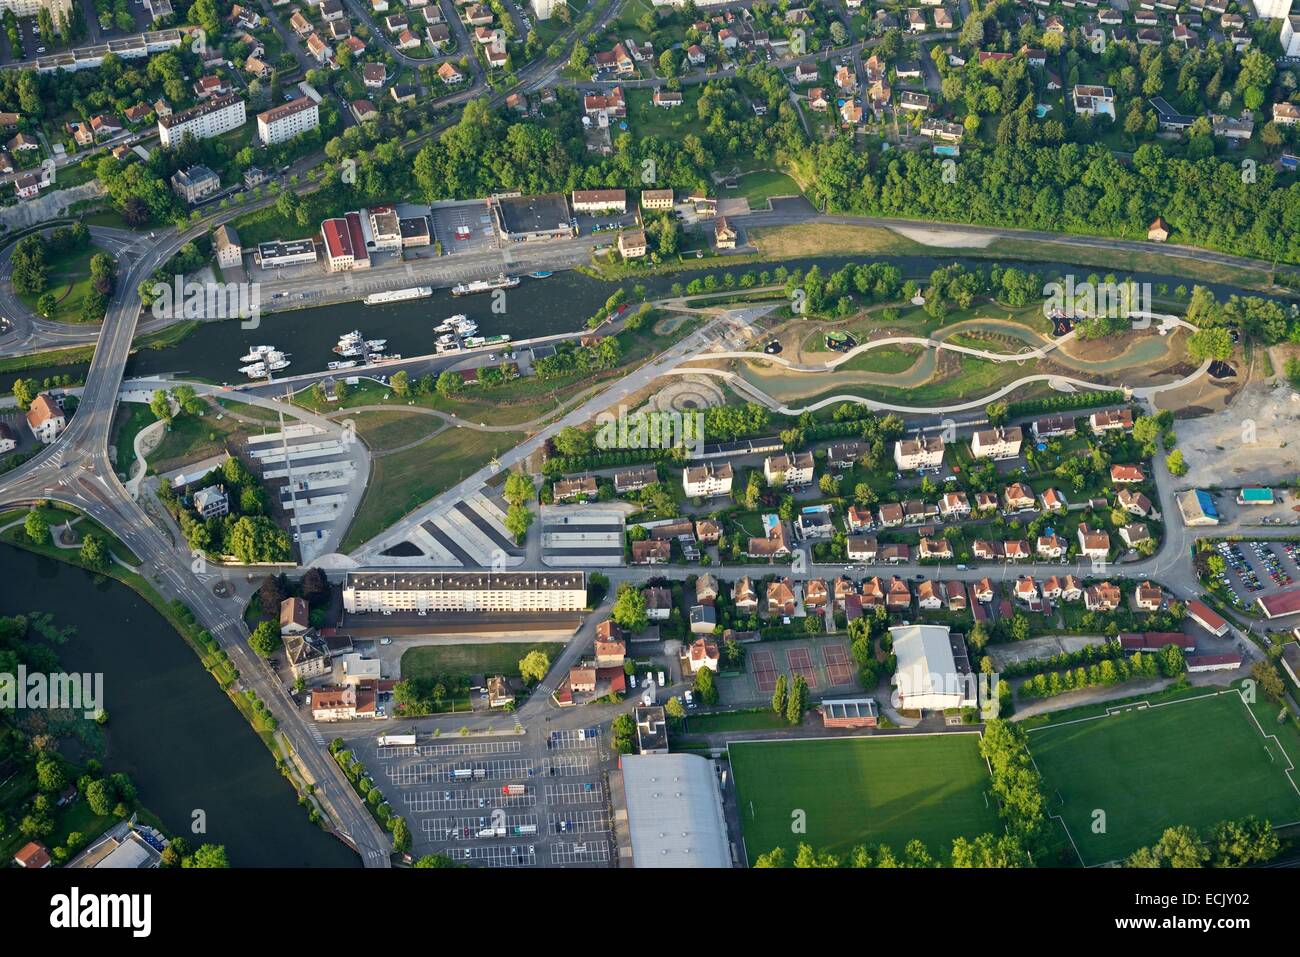 France, Doubs, Montbeliard, planning urban park called the island moving along the Canal du Rhone au Rhin near downtown (aerial view) Stock Photo